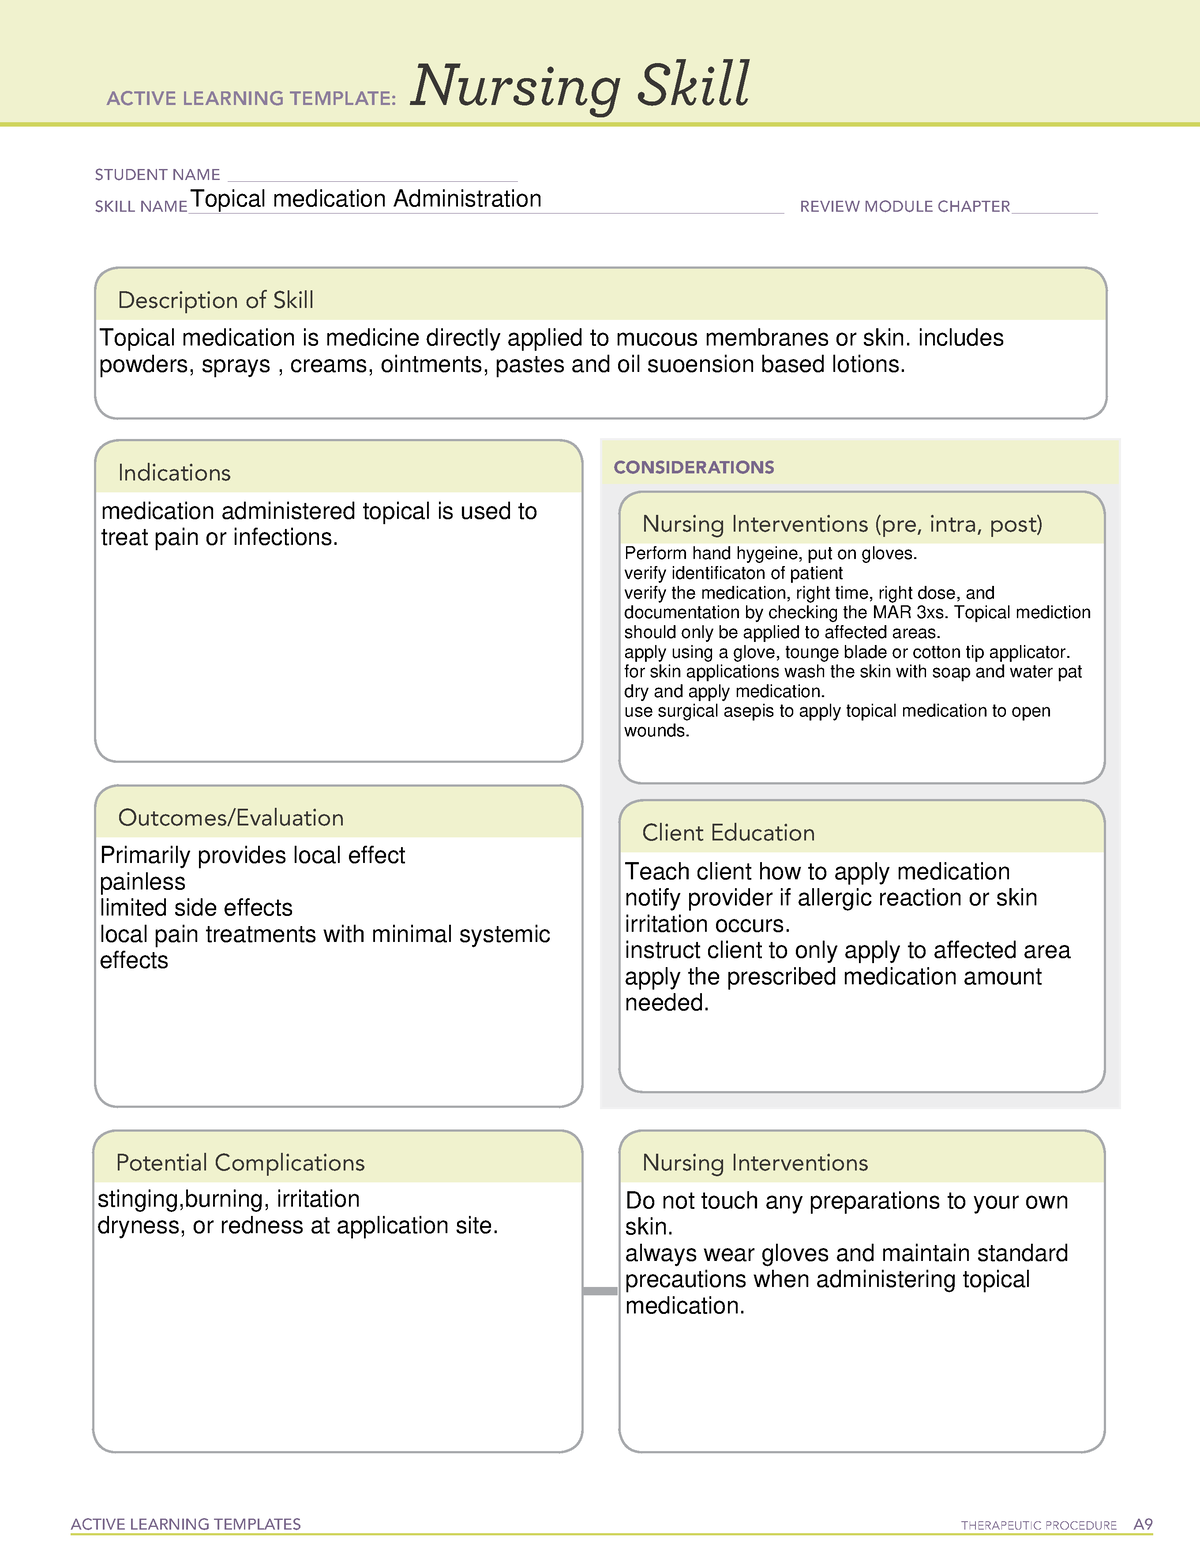 Topical - Nursing skill template - ACTIVE LEARNING TEMPLATES ...